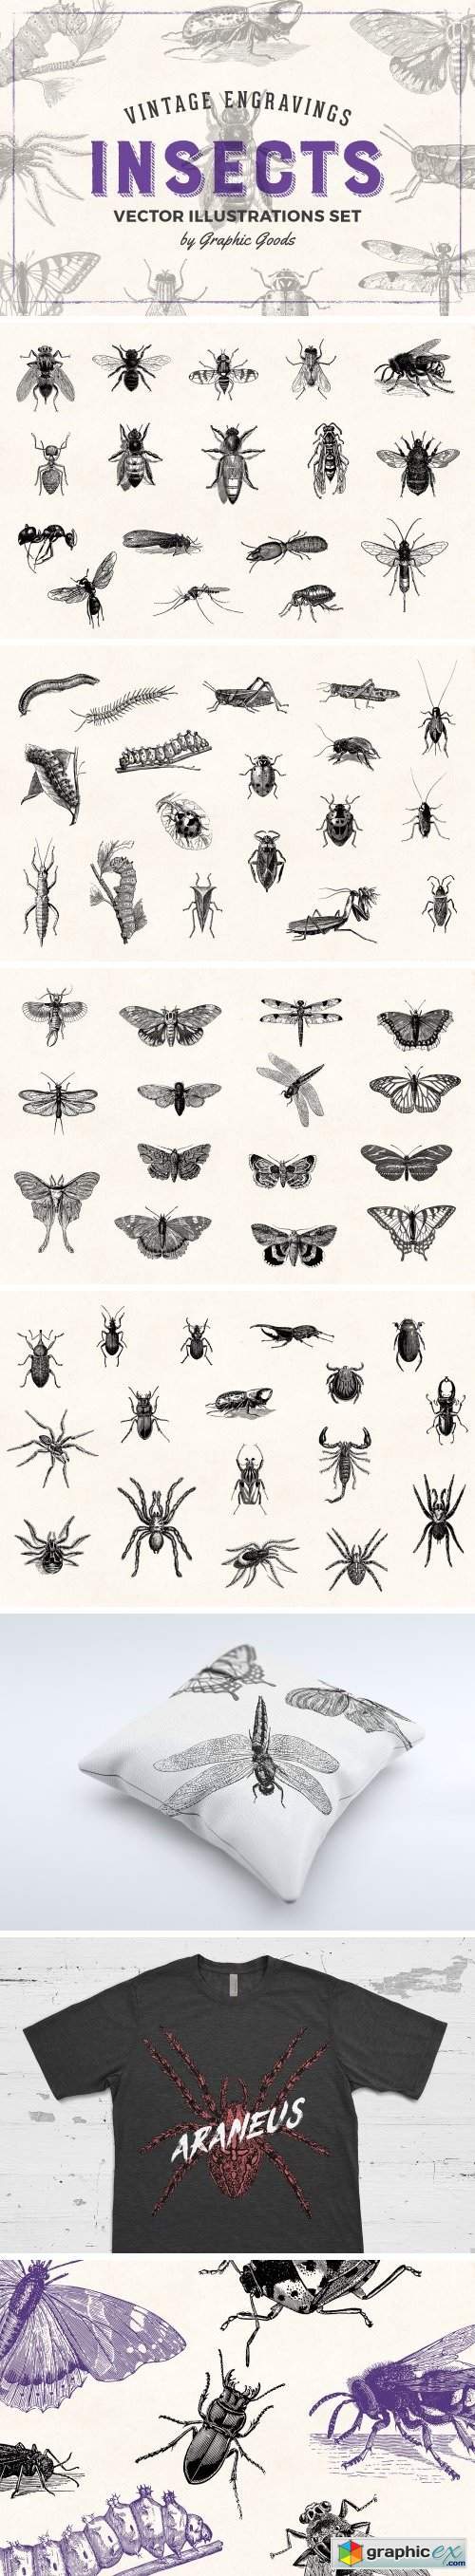 Insects - Vintage Illustrations